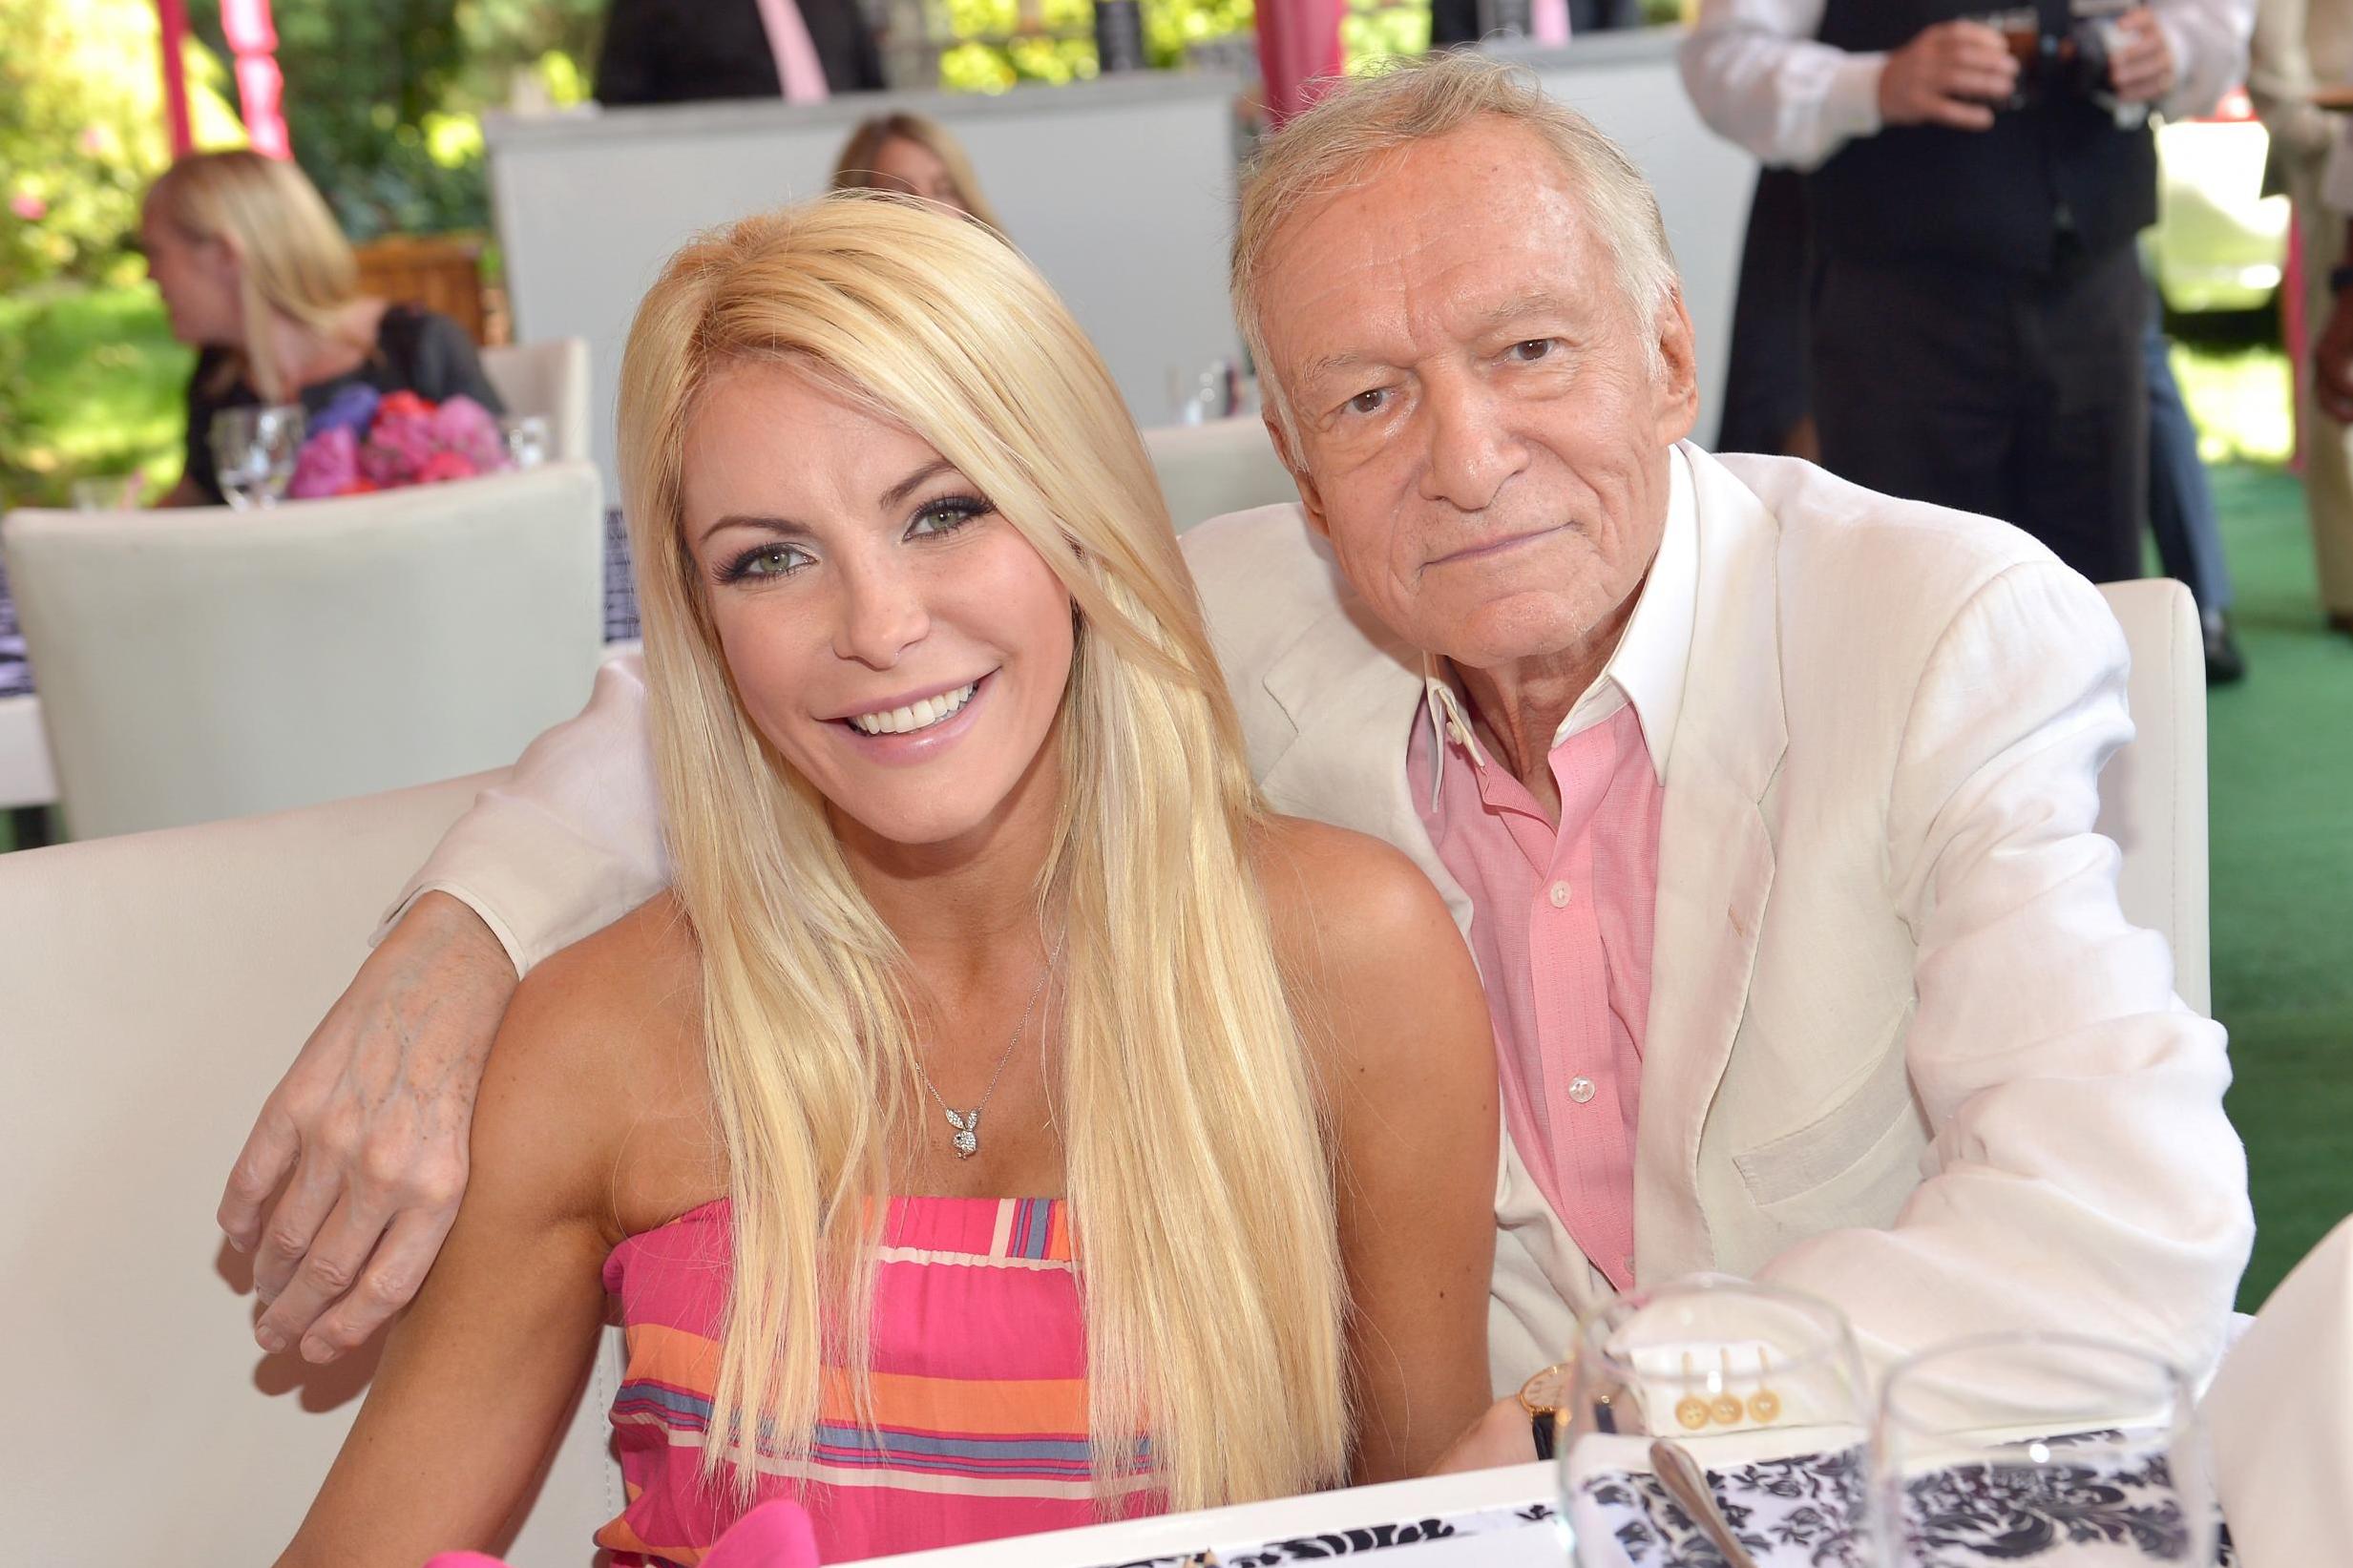 Crystal dazzled the Hef, 60 years her senior, with good looks and iron-clad pre-nup